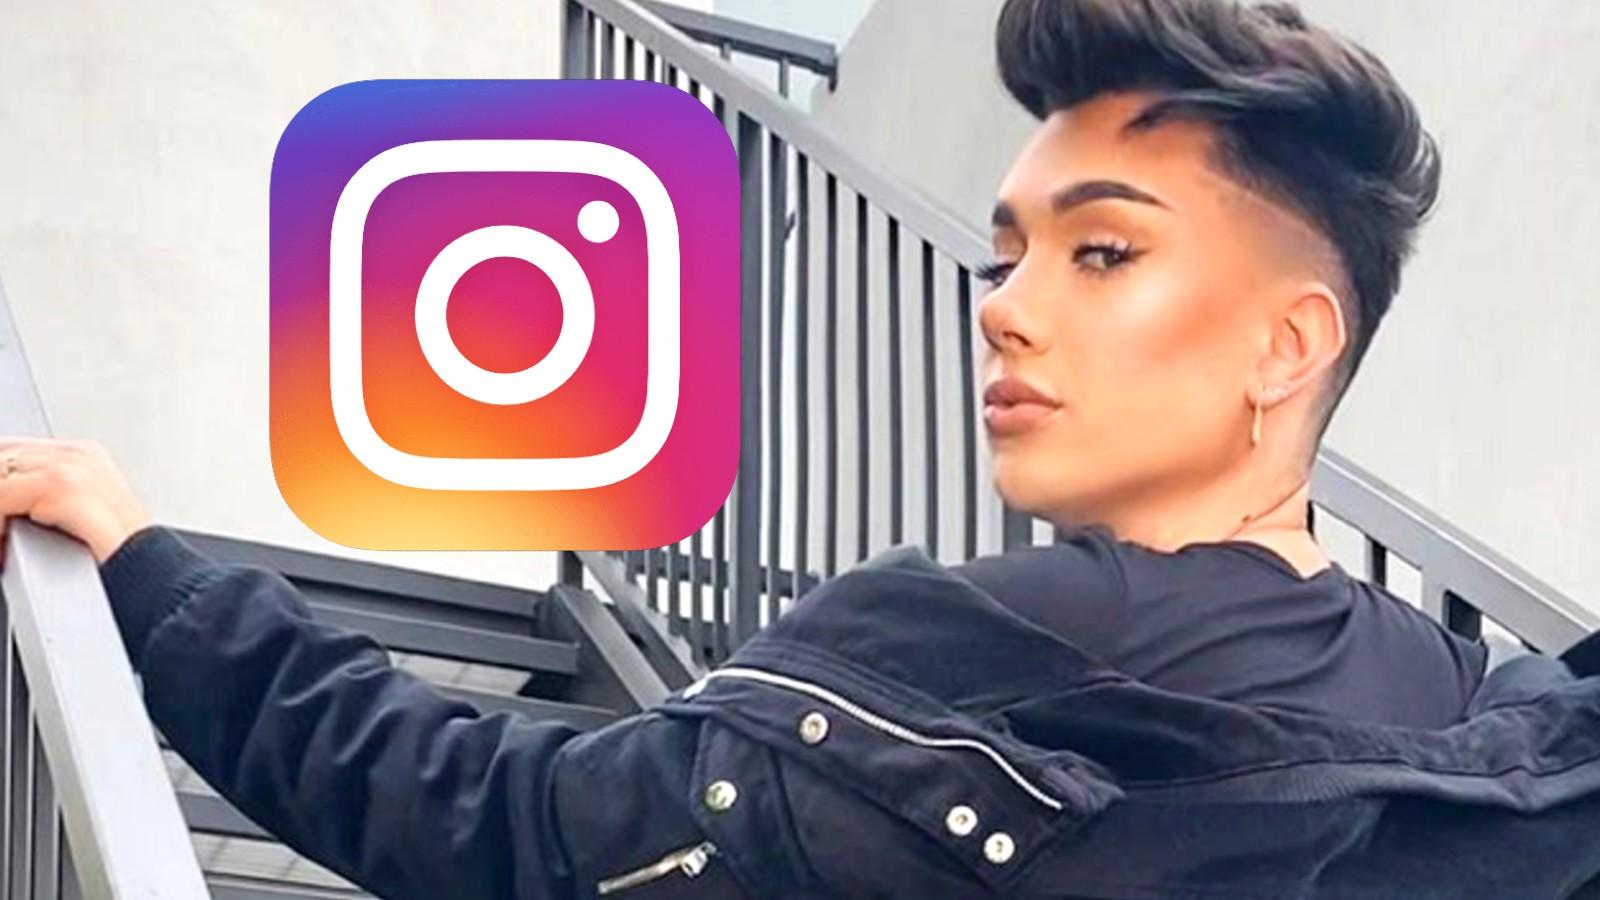 James Charles looks over his shoulder, next to the Instagram logo